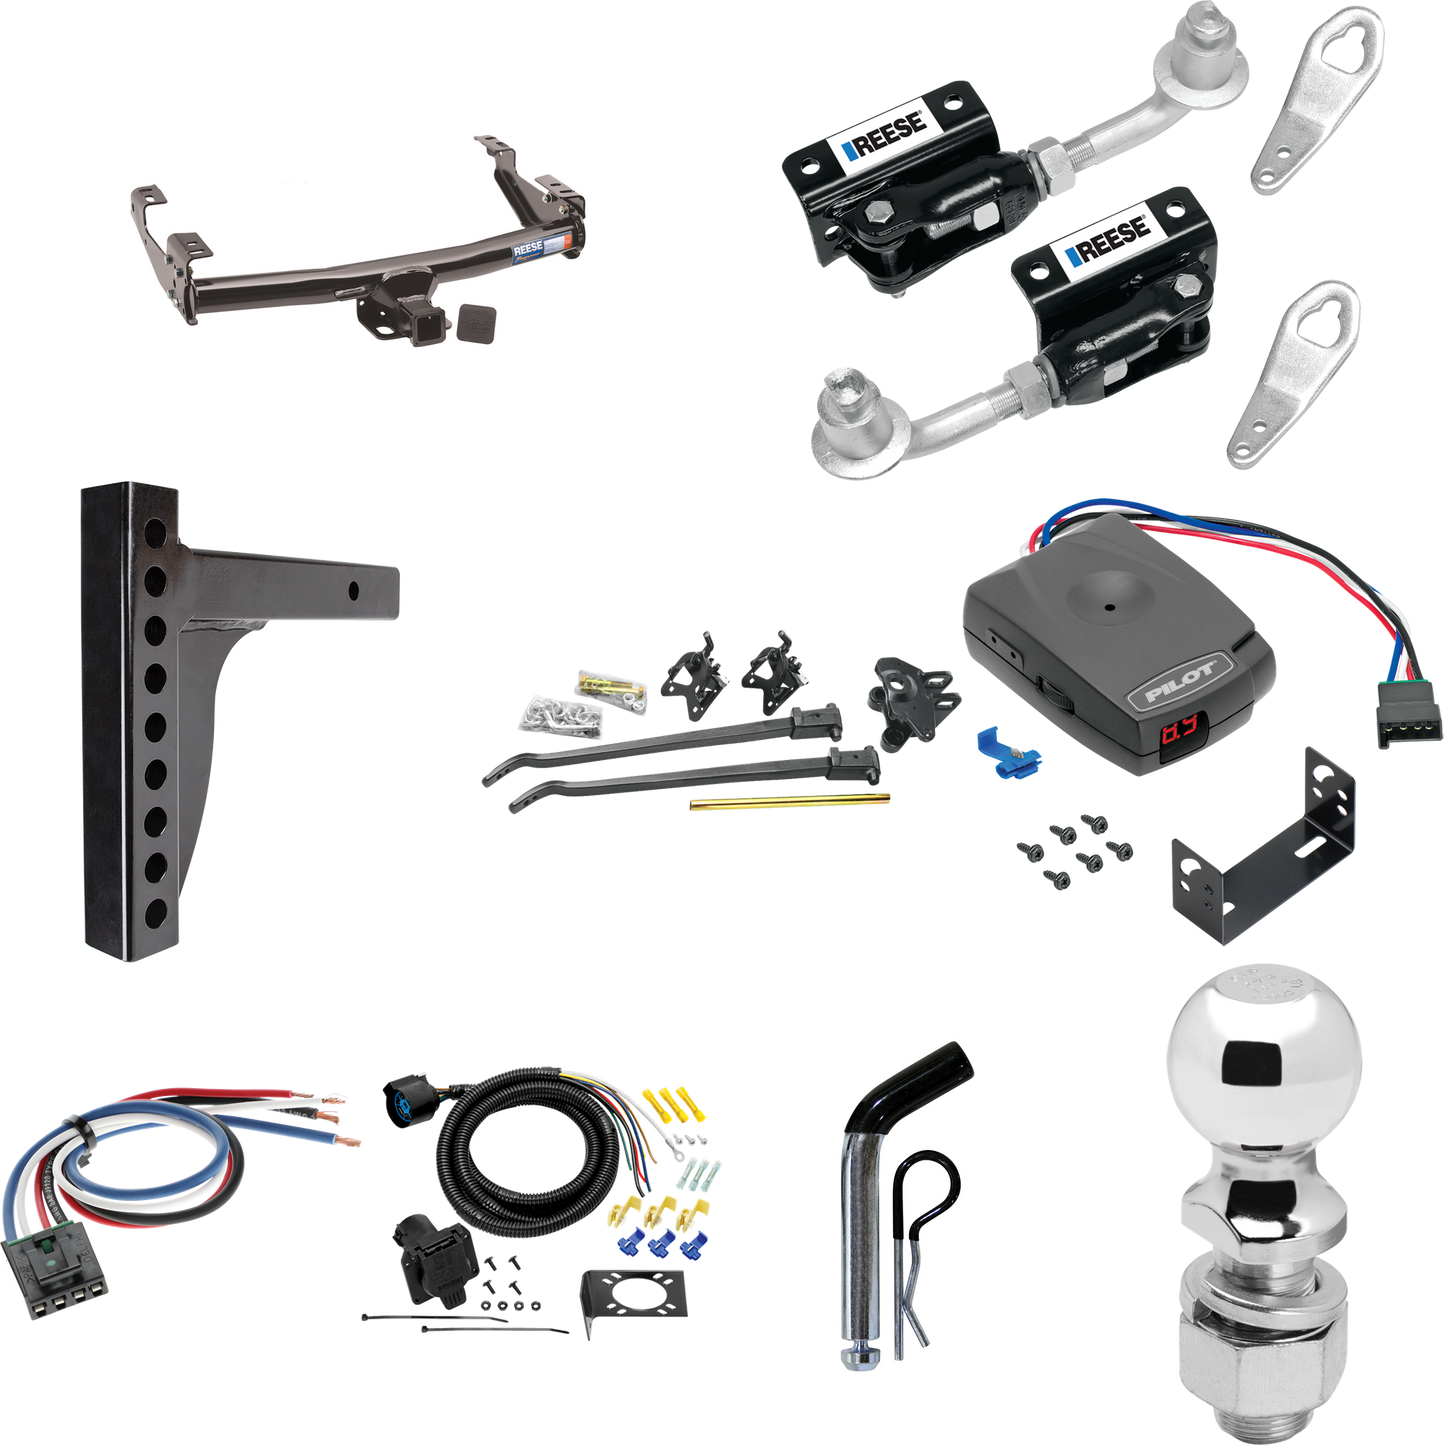 Fits 1995-2001 Dodge Ram 4000 Trailer Hitch Tow PKG w/ 12K Trunnion Bar Weight Distribution Hitch + Pin/Clip + Dual Cam Sway Control + 2-5/16" Ball + Pro Series Pilot Brake Control + Generic BC Wiring Adapter + 7-Way RV Wiring By Reese Towpower